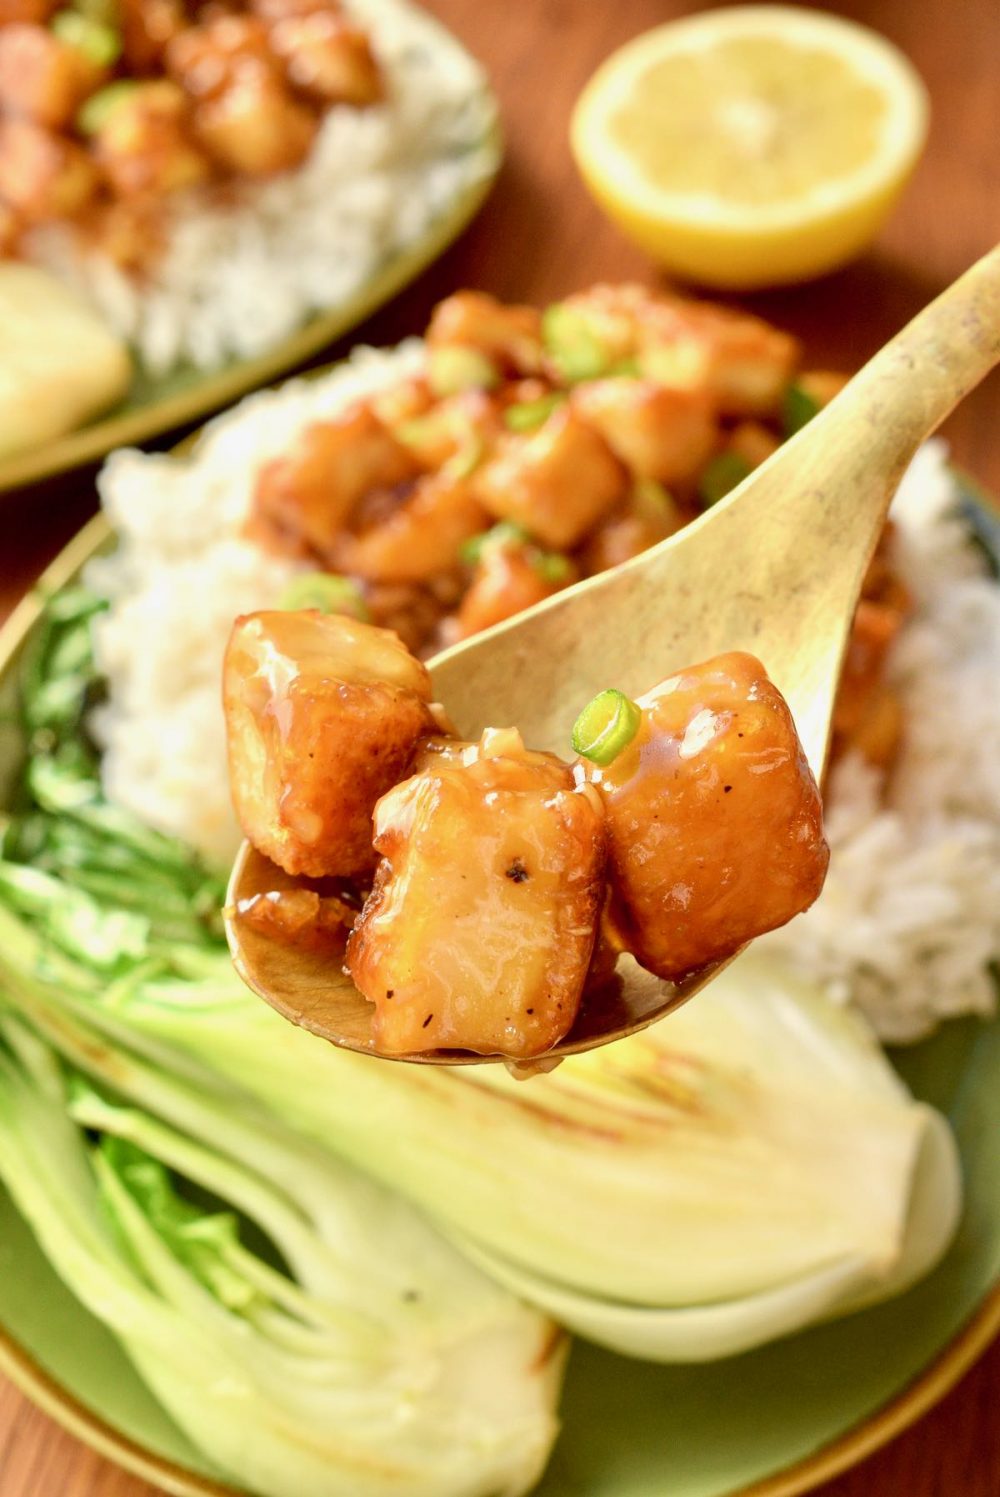 Sticky cubes of tofu on a spoon.